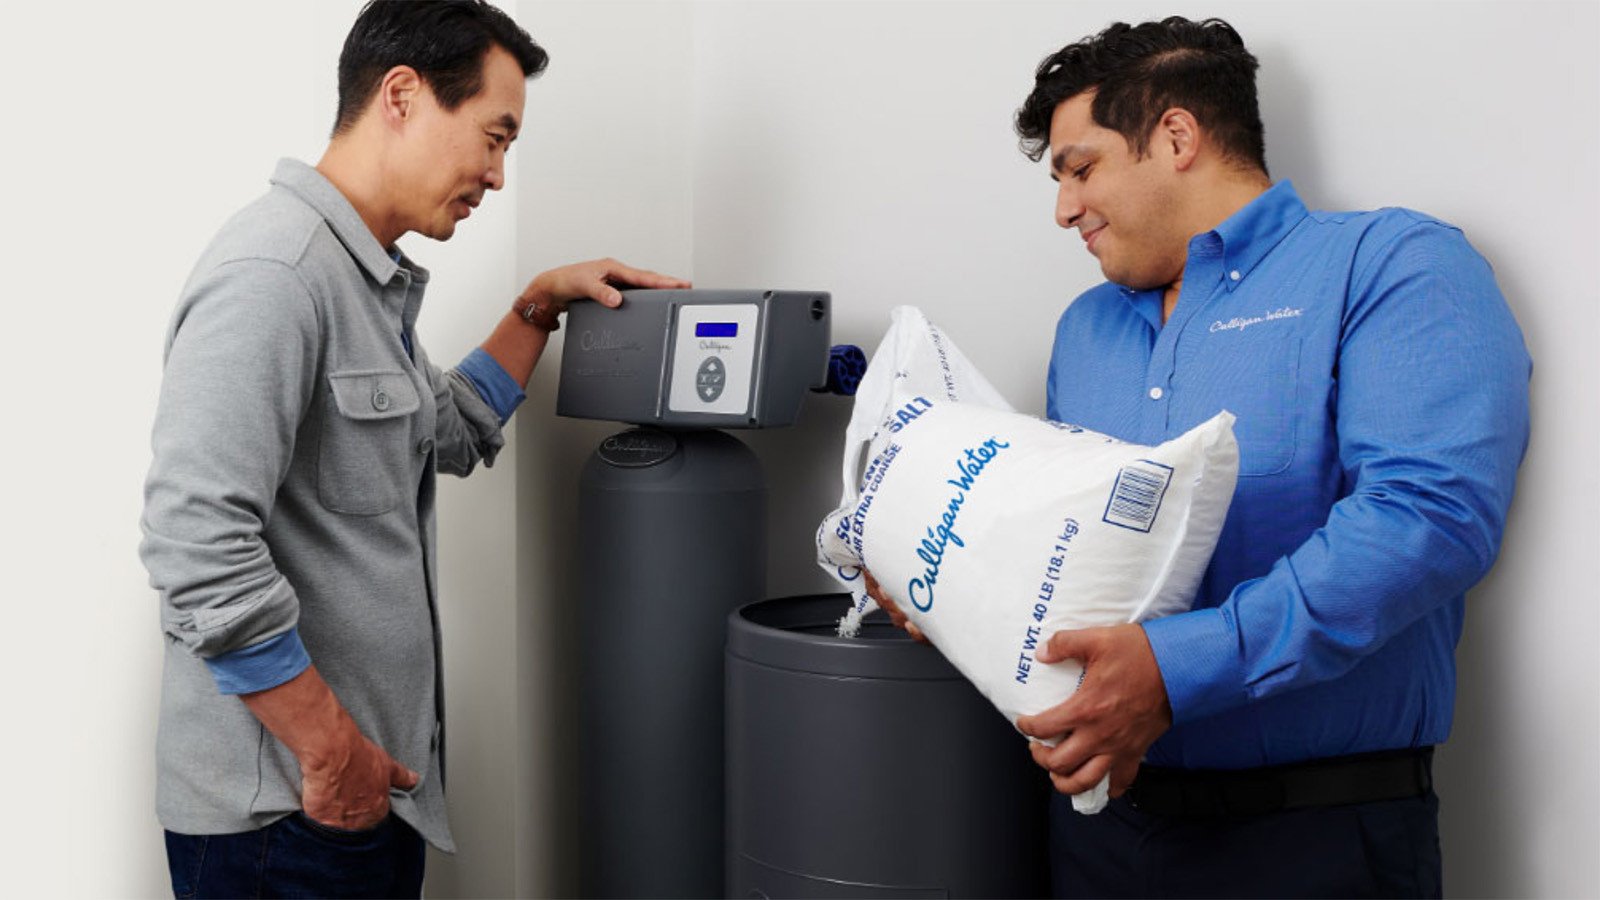 Culligan Man filling a water softener with salt